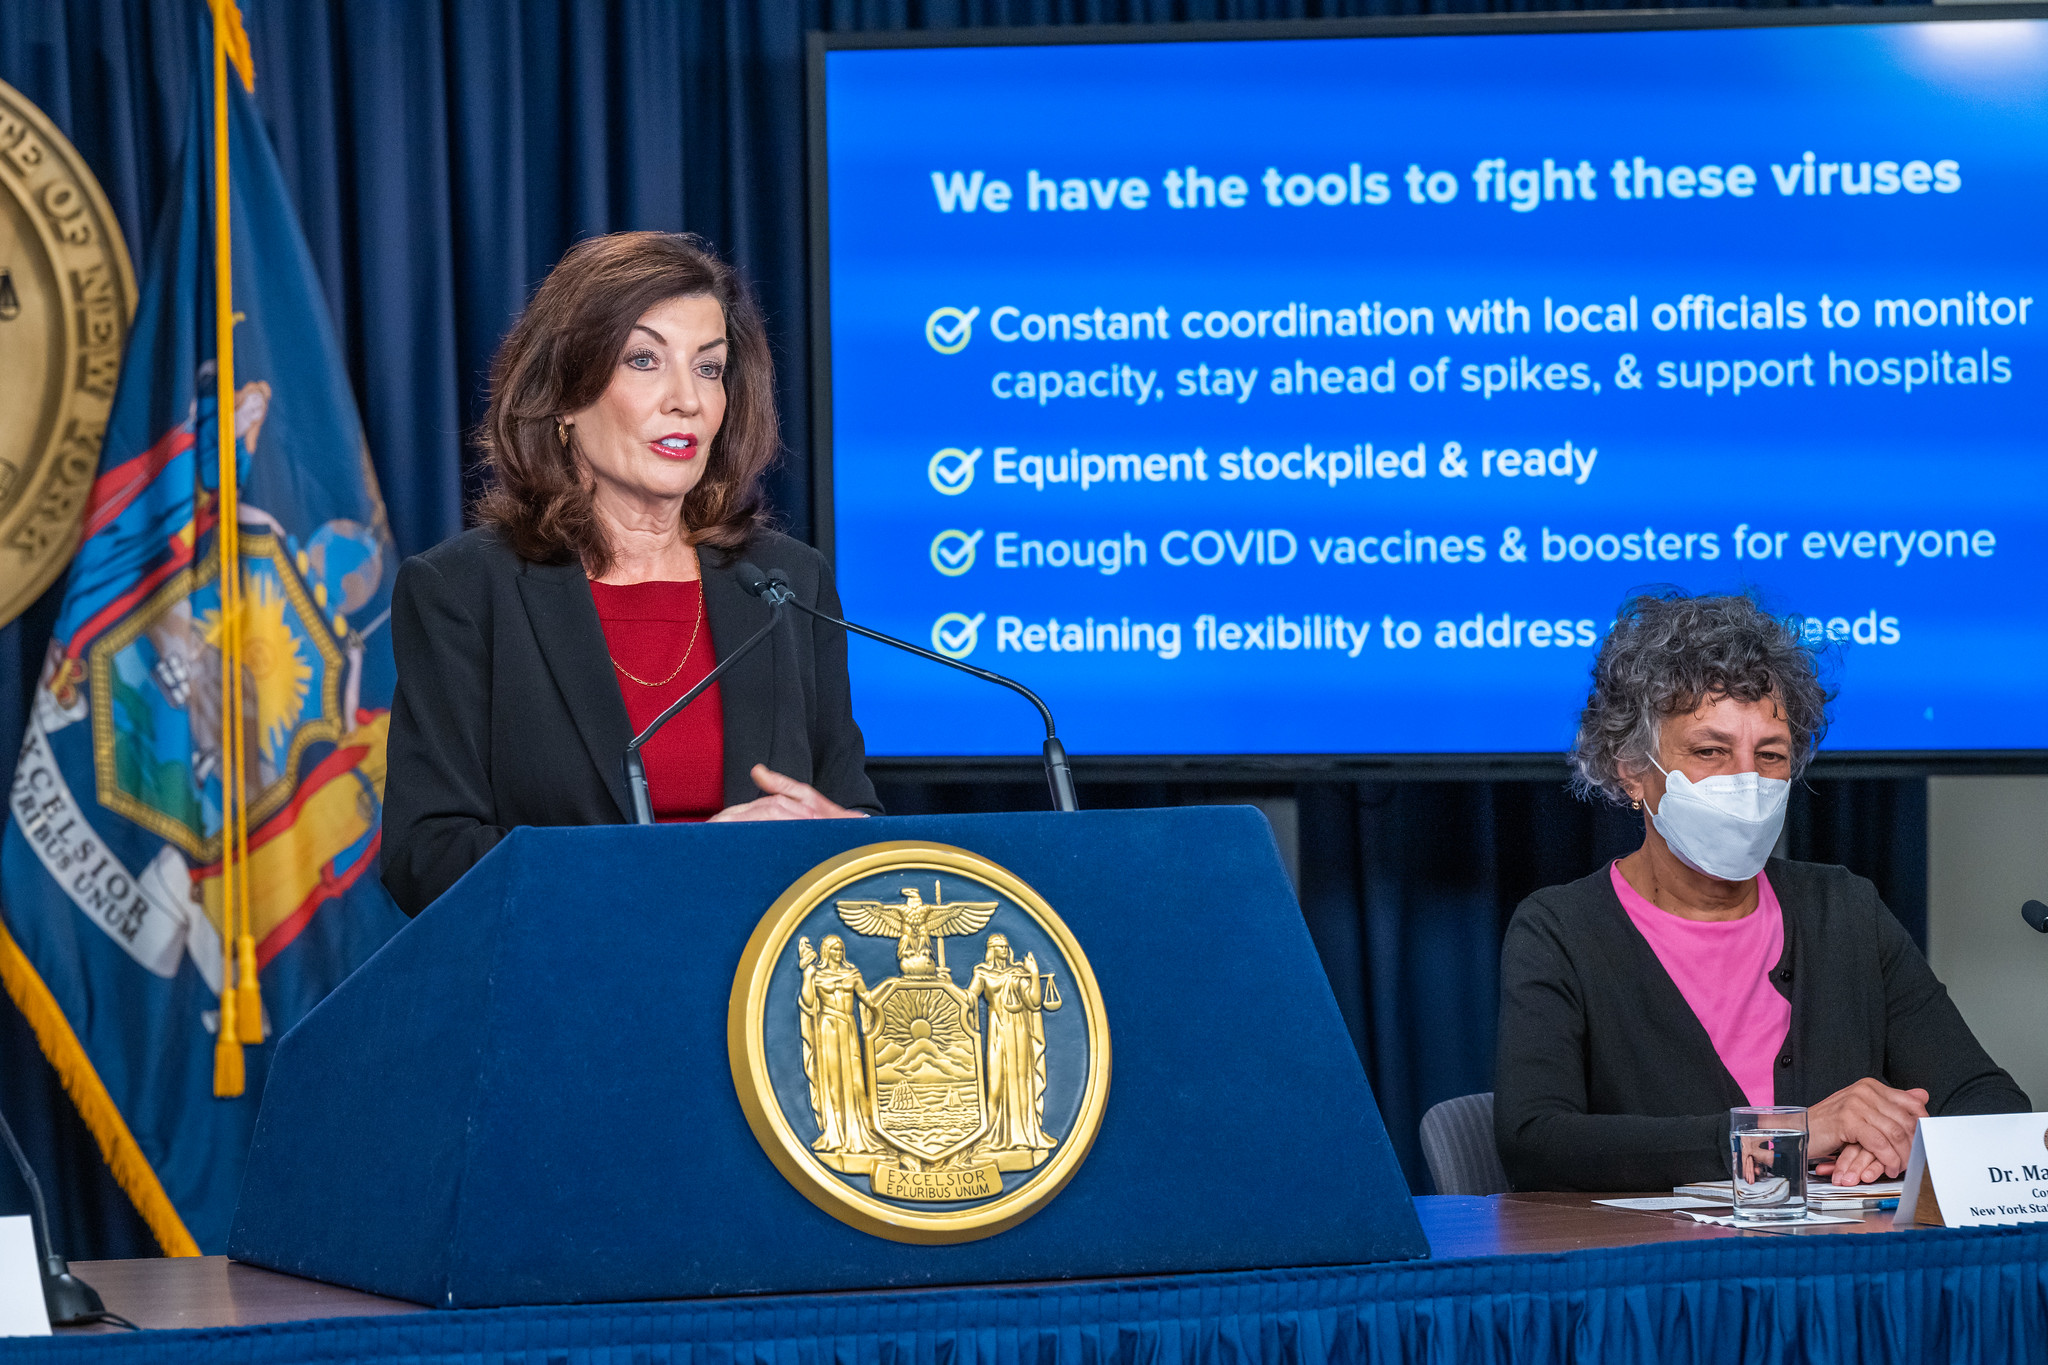 Hochul Ditched Health Insurance Promise to Undocumented New Yorkers